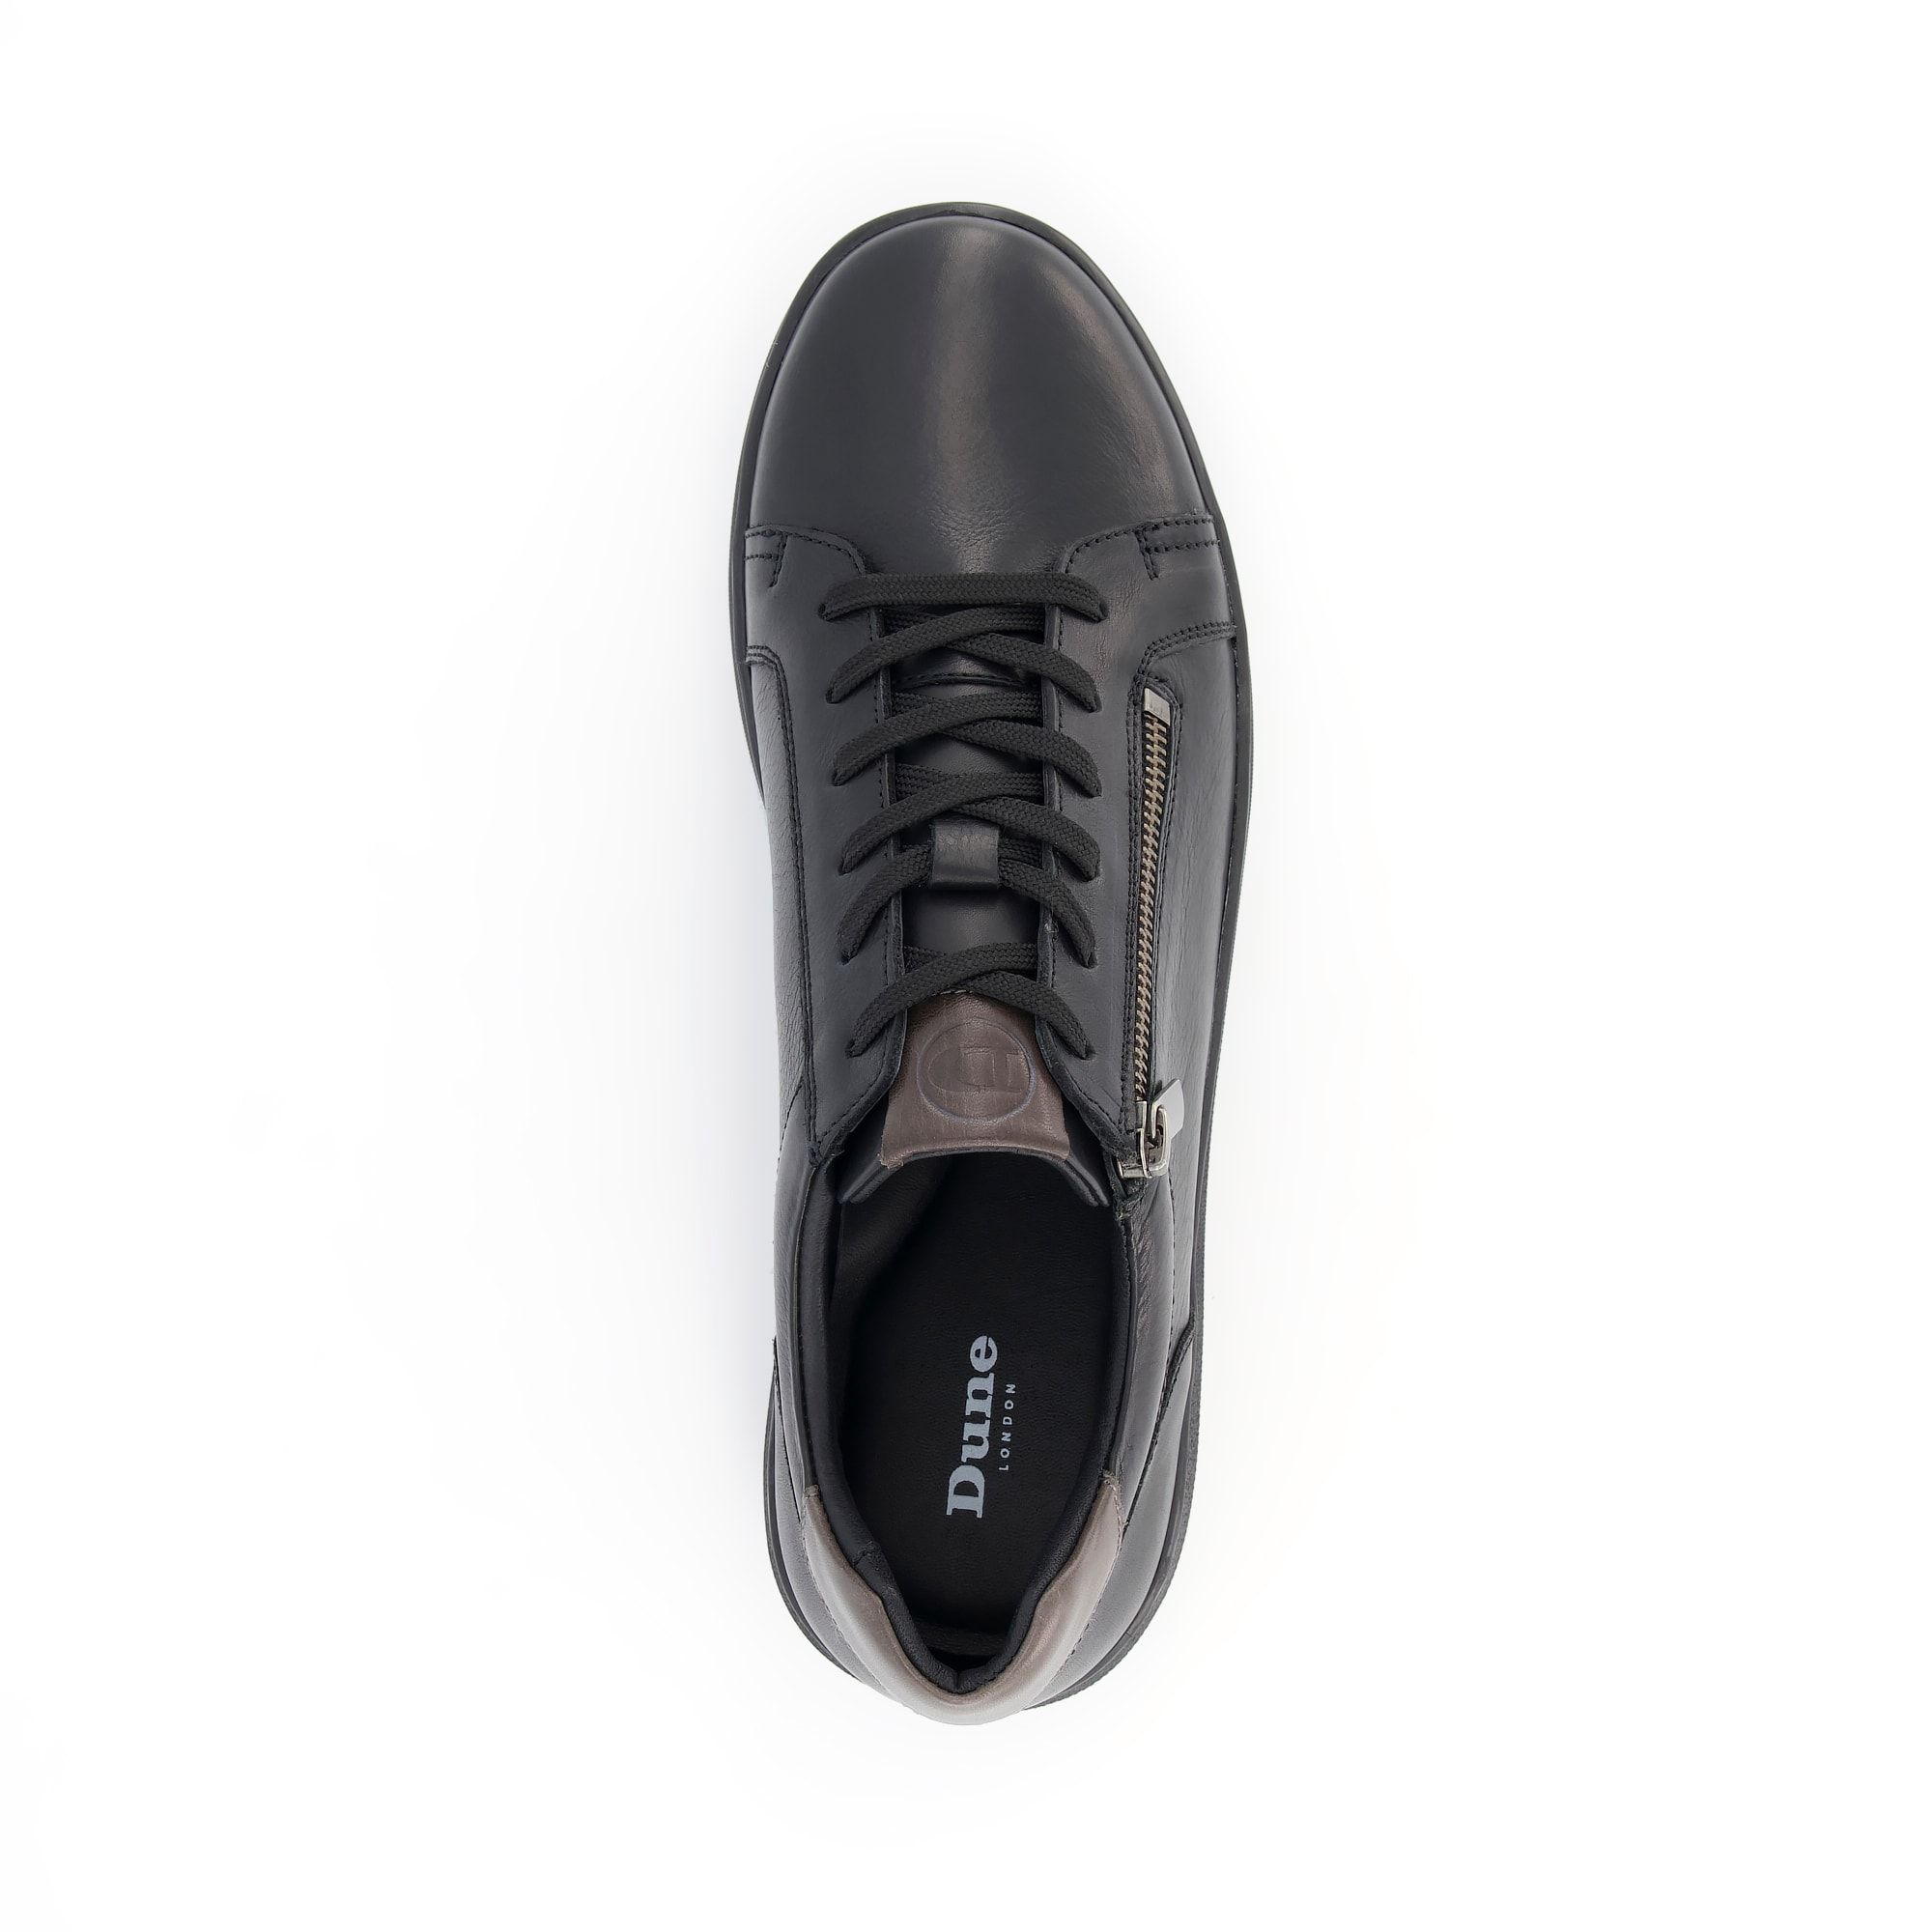 A versatile pair of leather cup sole trainers that combine sporty and smart styling. The zip detail gives them a casual edge while the sleek leather finish means you can wear them for more formal occasions. An adaptable style that will take you anywh